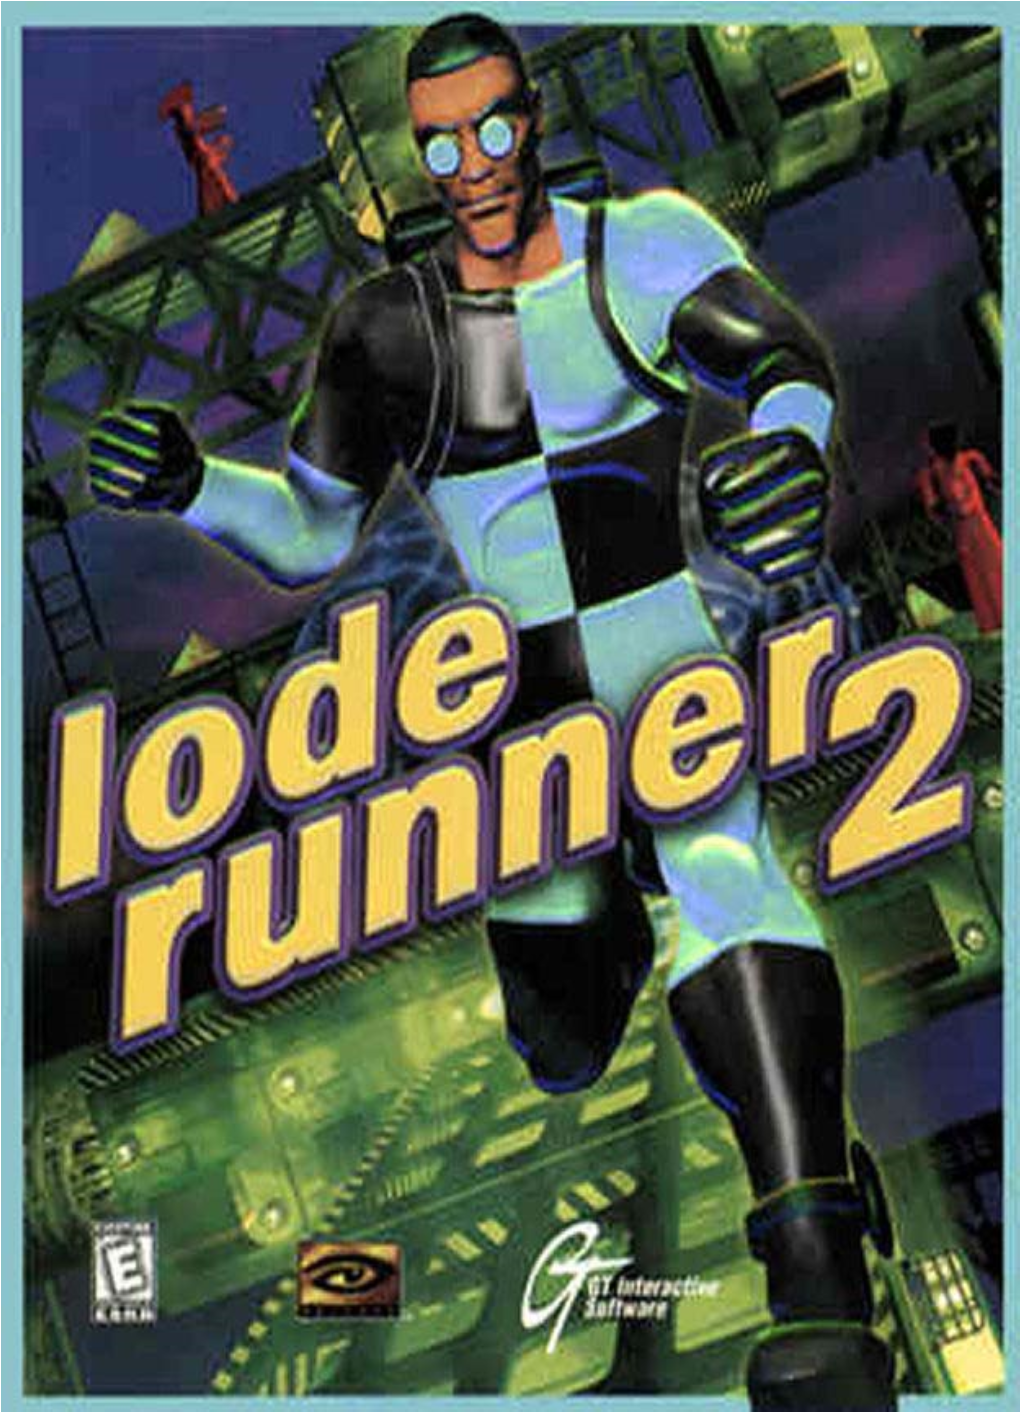 Lode Runner 2 Is the Latest Addition to the Family